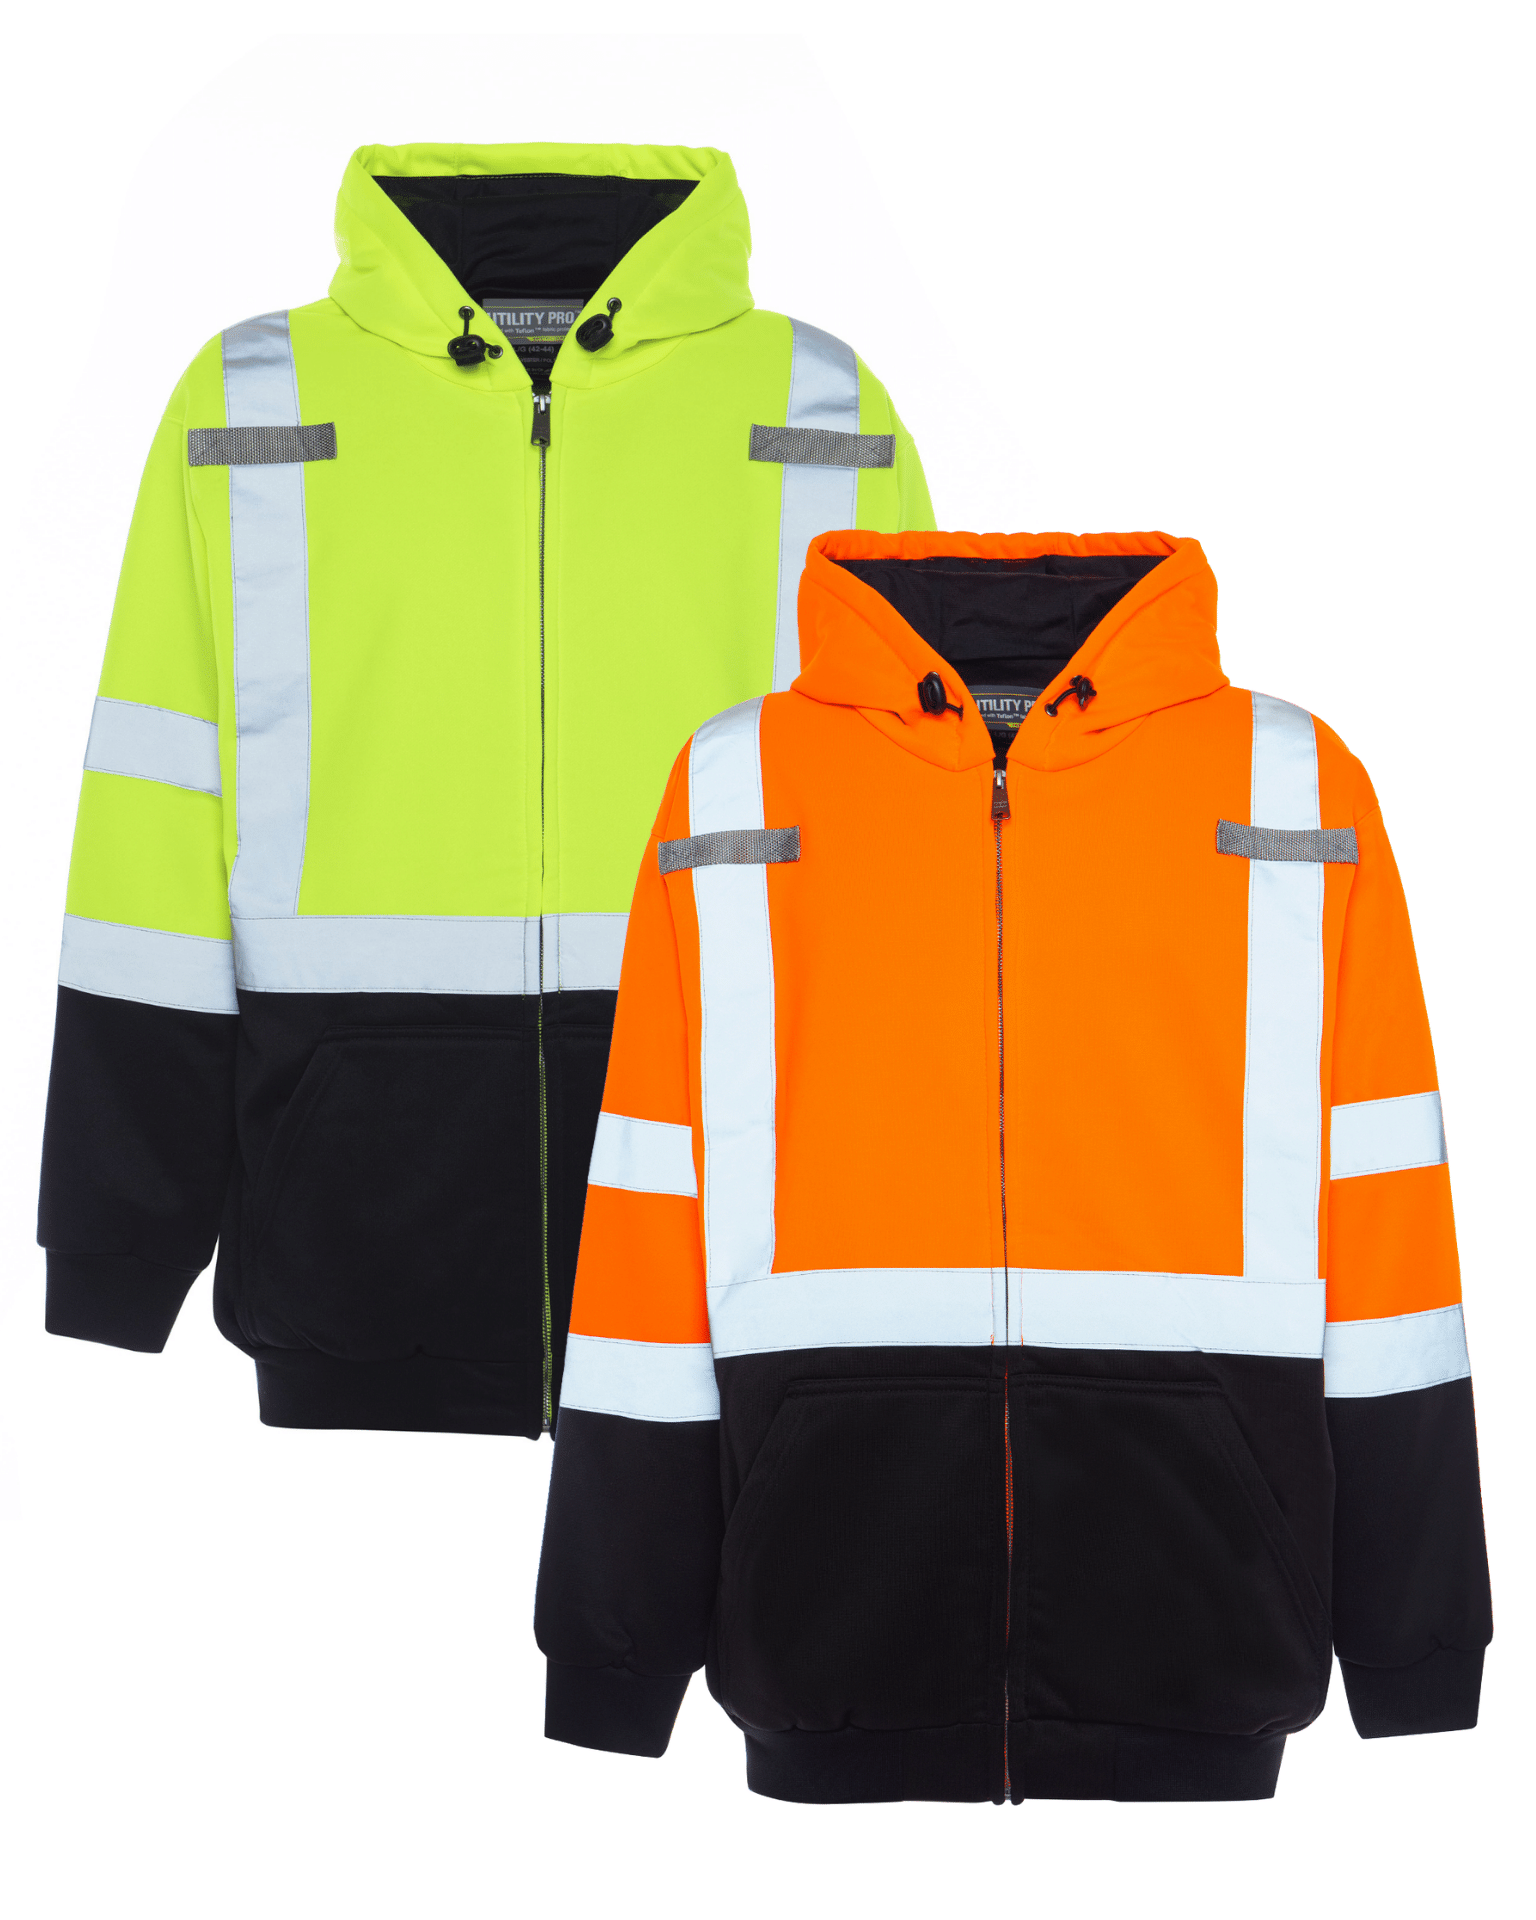 ANSI Class 3 reflective safety hoodie for men